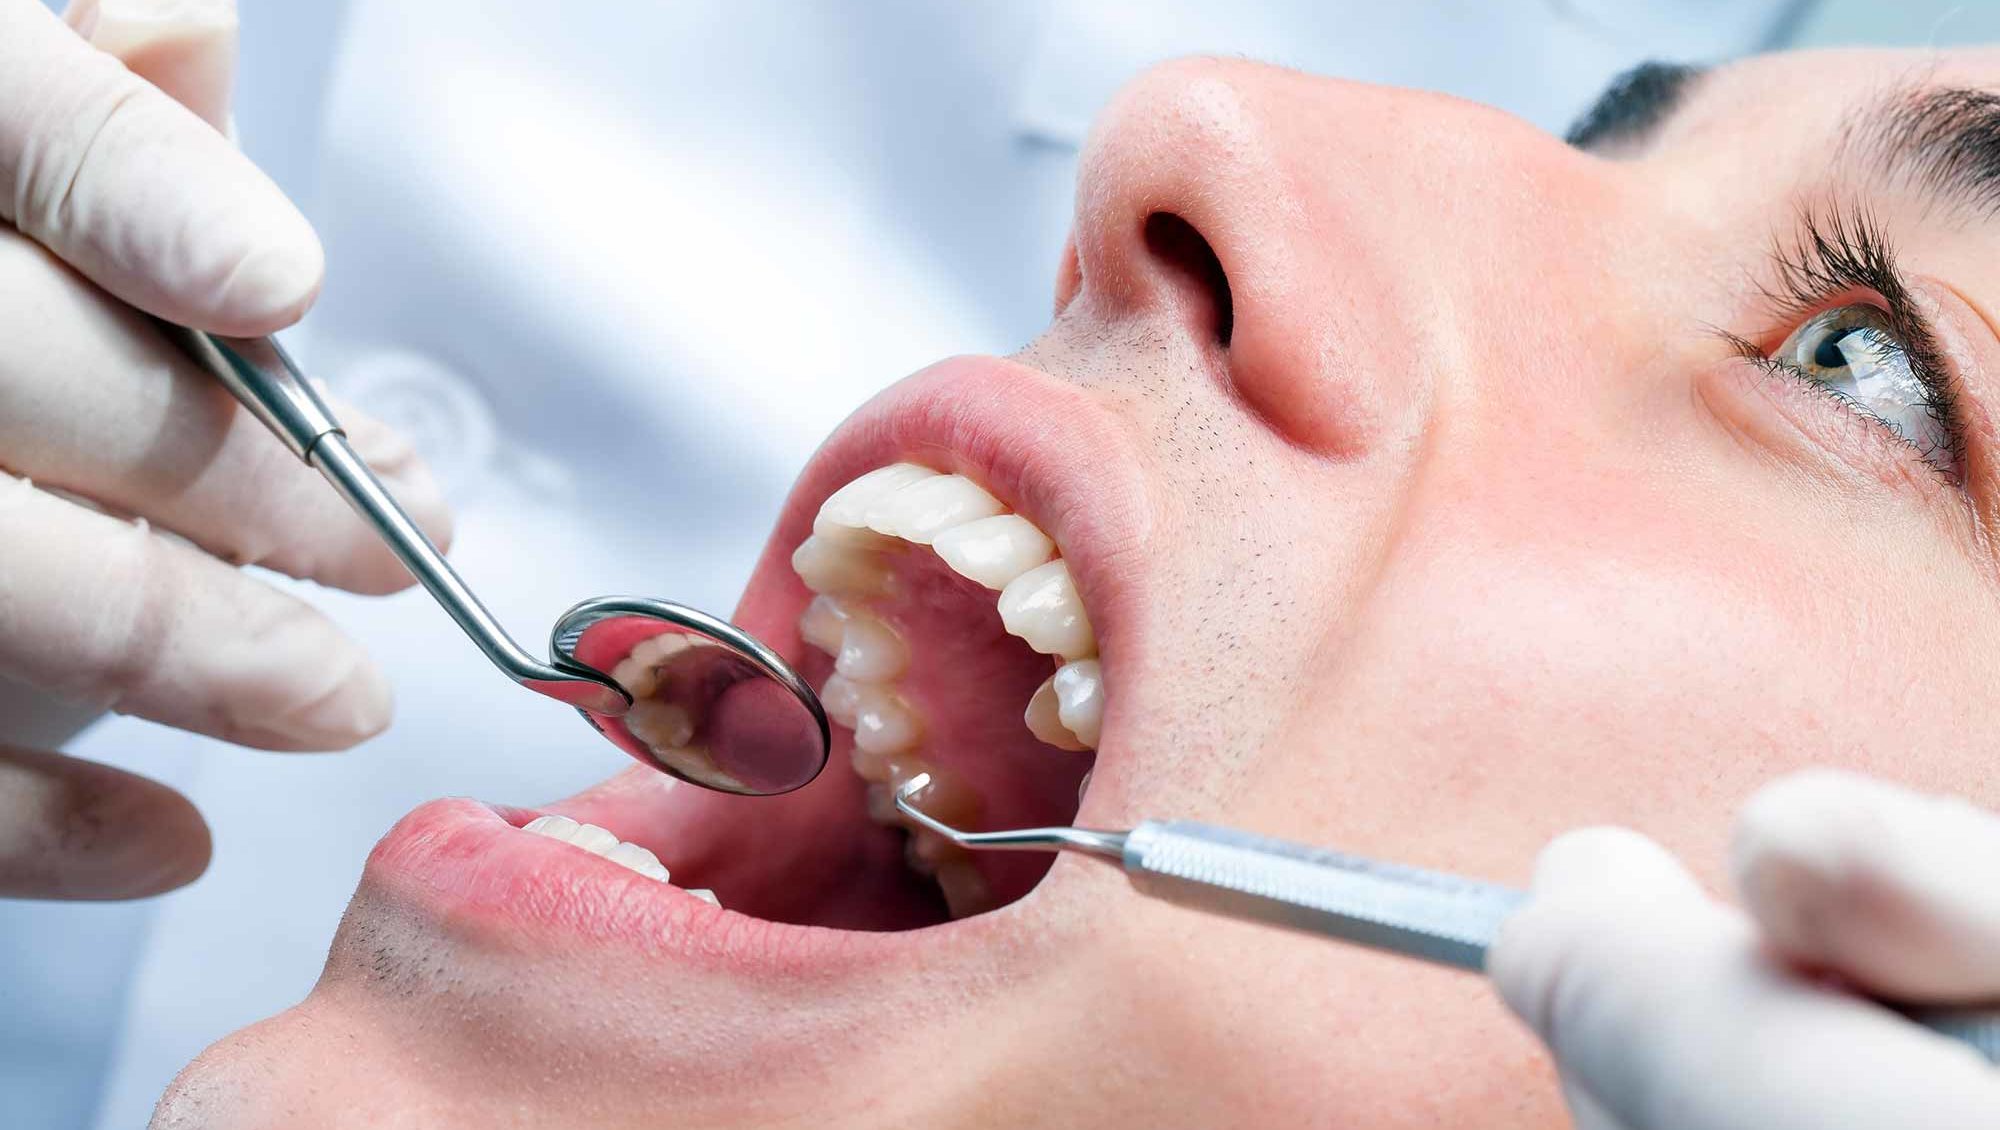 Why is Gum Disease Linked To COVID-19 Patients?